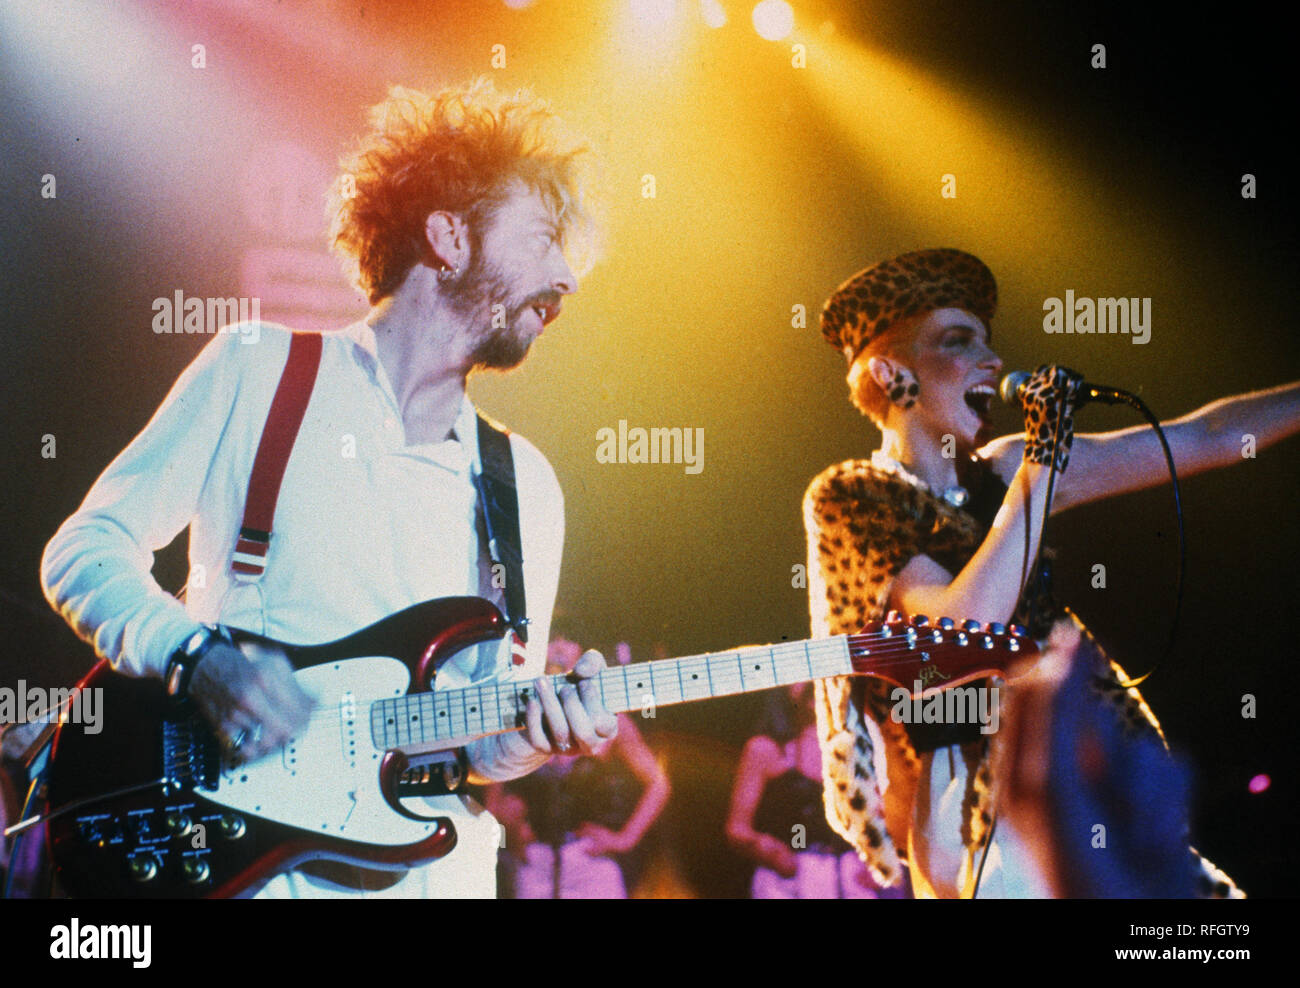 EURYTHMICS UK pop duo with Annie Lennox and David Stewart about 1989 Stock Photo